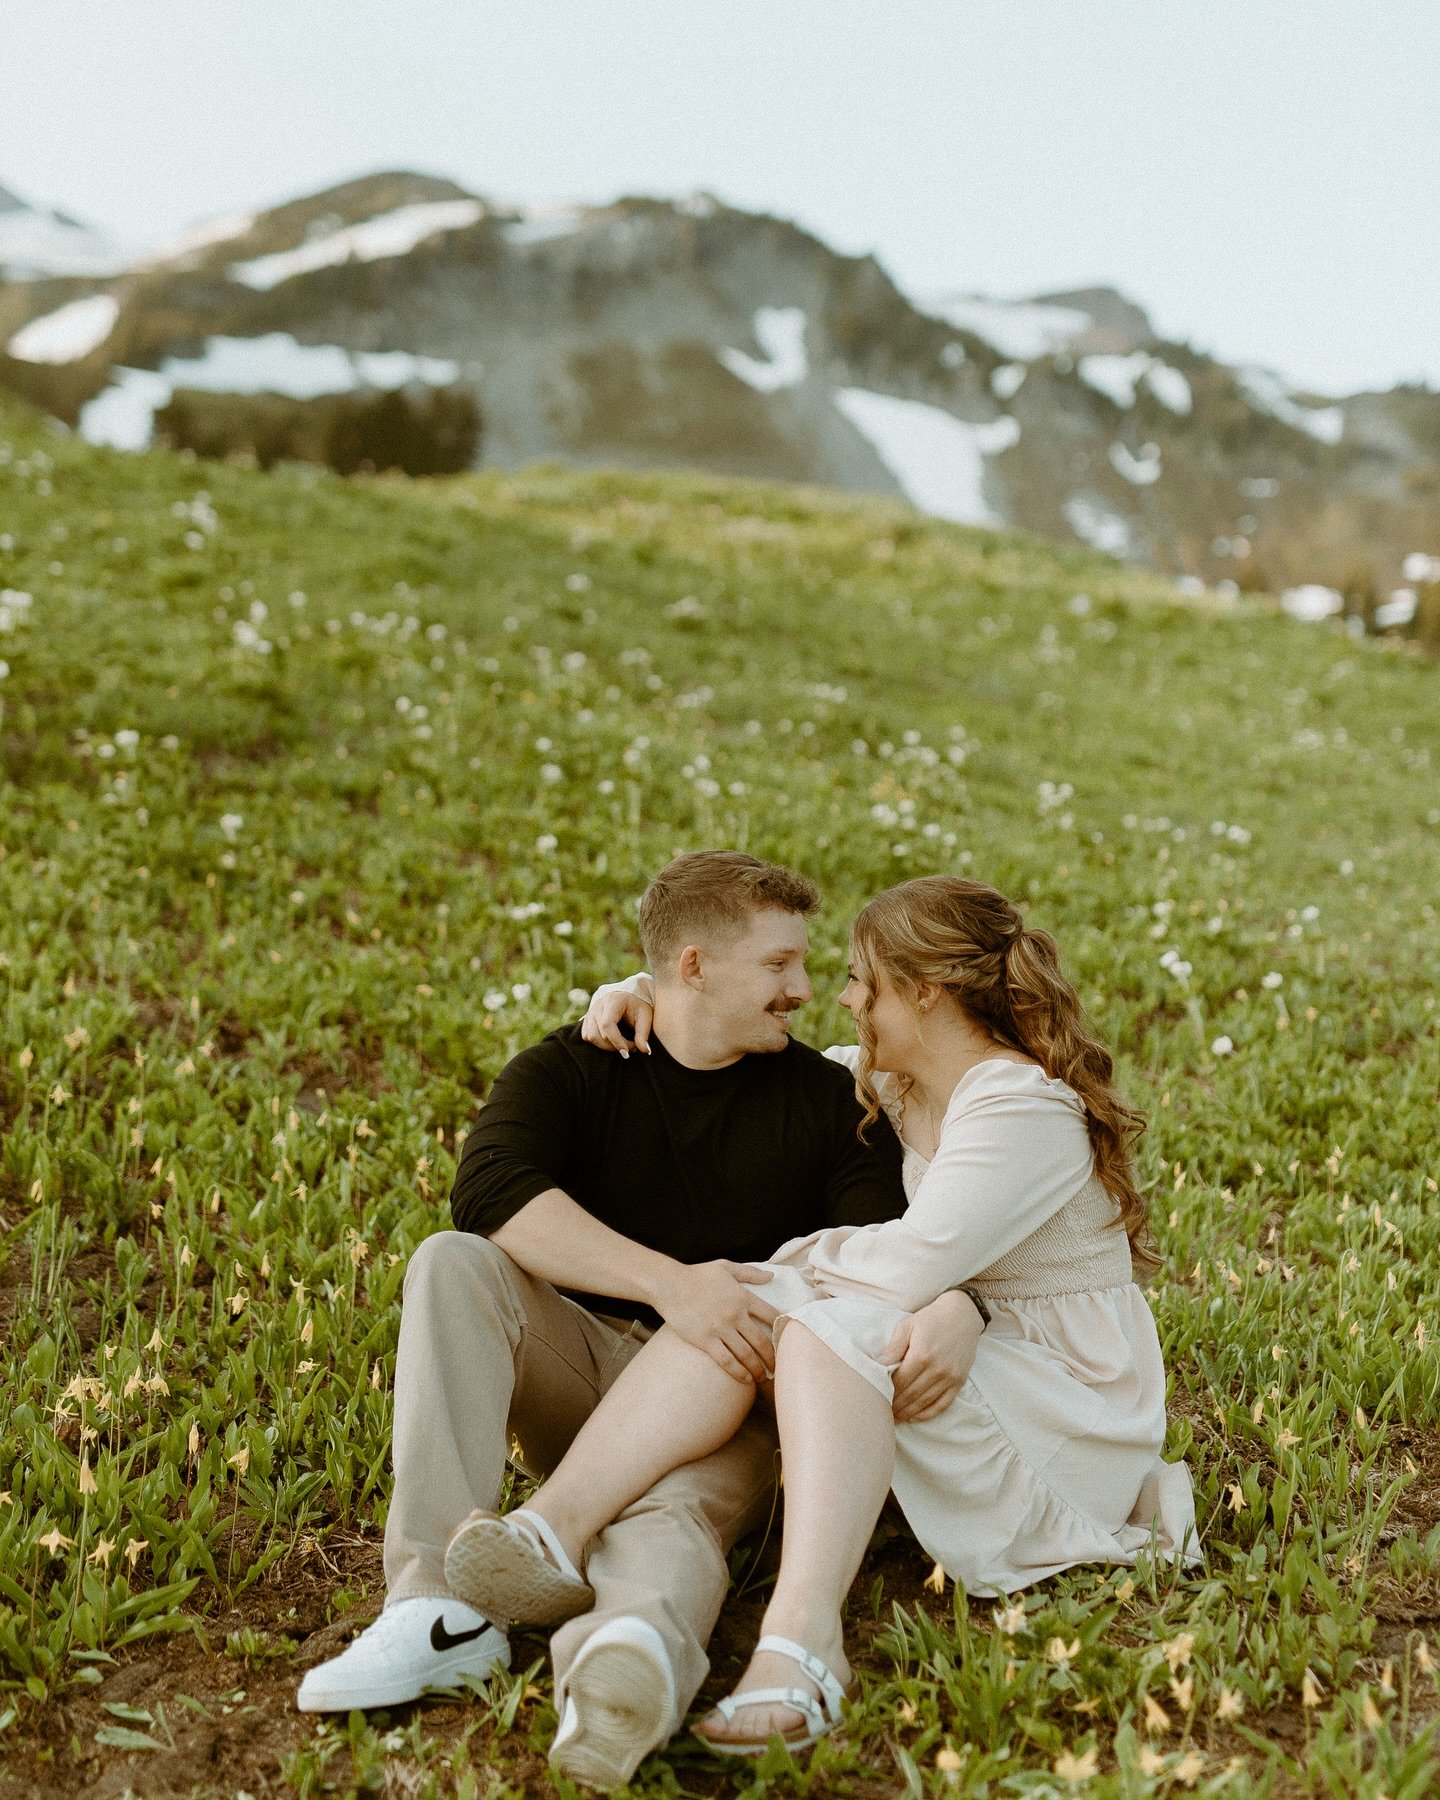 &ldquo;I love you to the mountains and back&rdquo;✨

#tacomaengagementphotographer#pnwengagementphotographer#seattleengagementphotographer#seattlecouplesphotographer#snohomishengagementphotographer